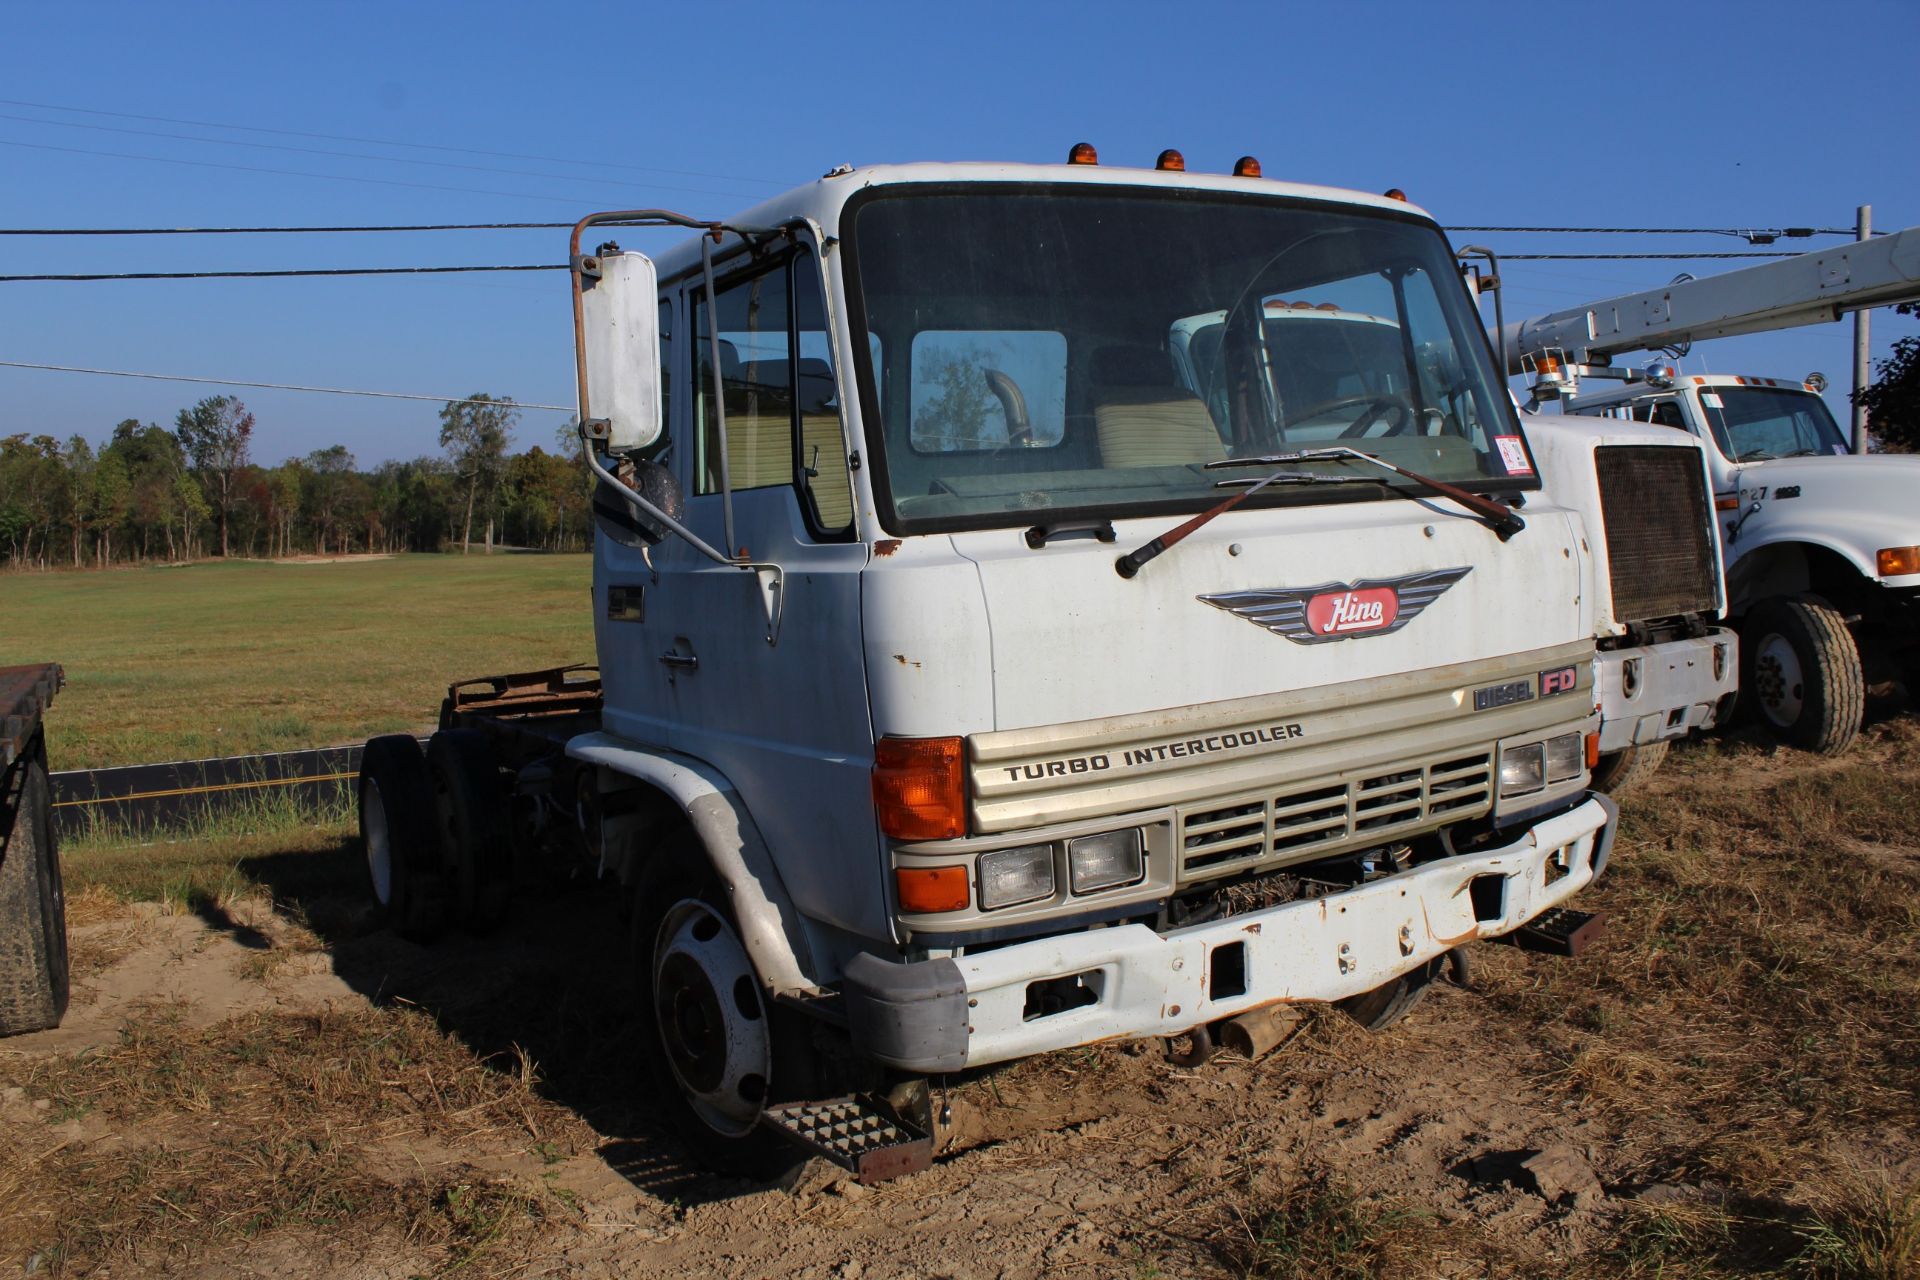 1992 Hino Cab & Chassis w/ Hino Diesel, 6-Speed Trans., ODO 258,797- Parts Truck - Image 2 of 2